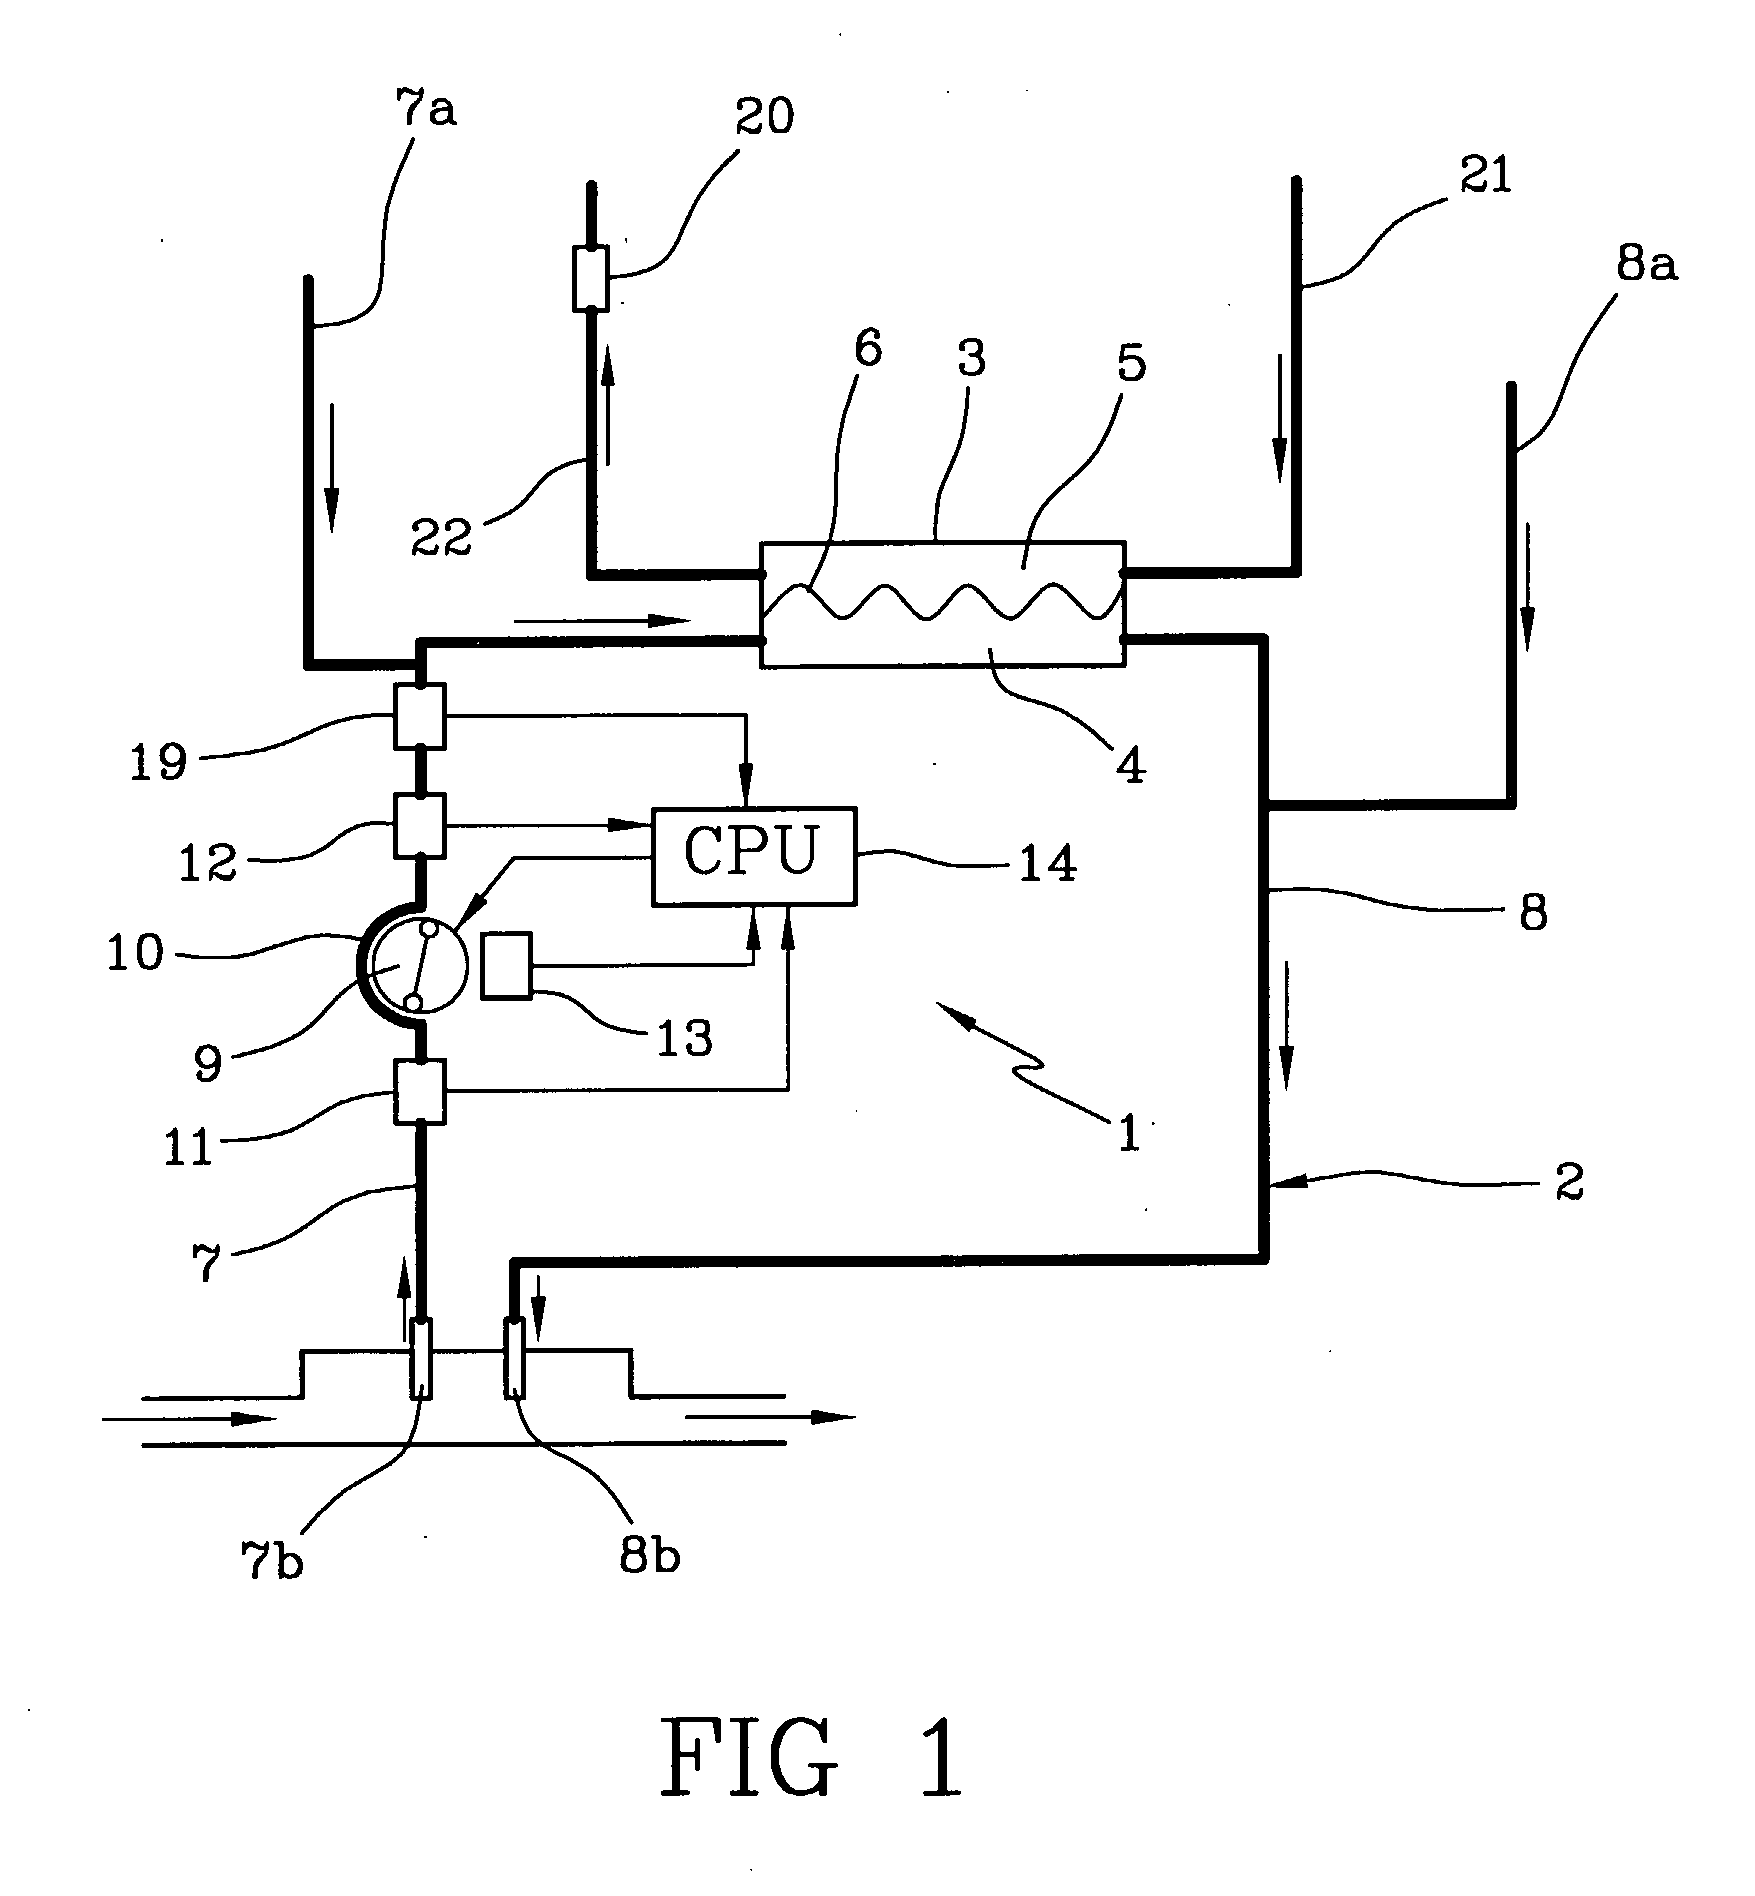 Apparatus for Controlling Blood Flow in an Extracorporeal Circuit